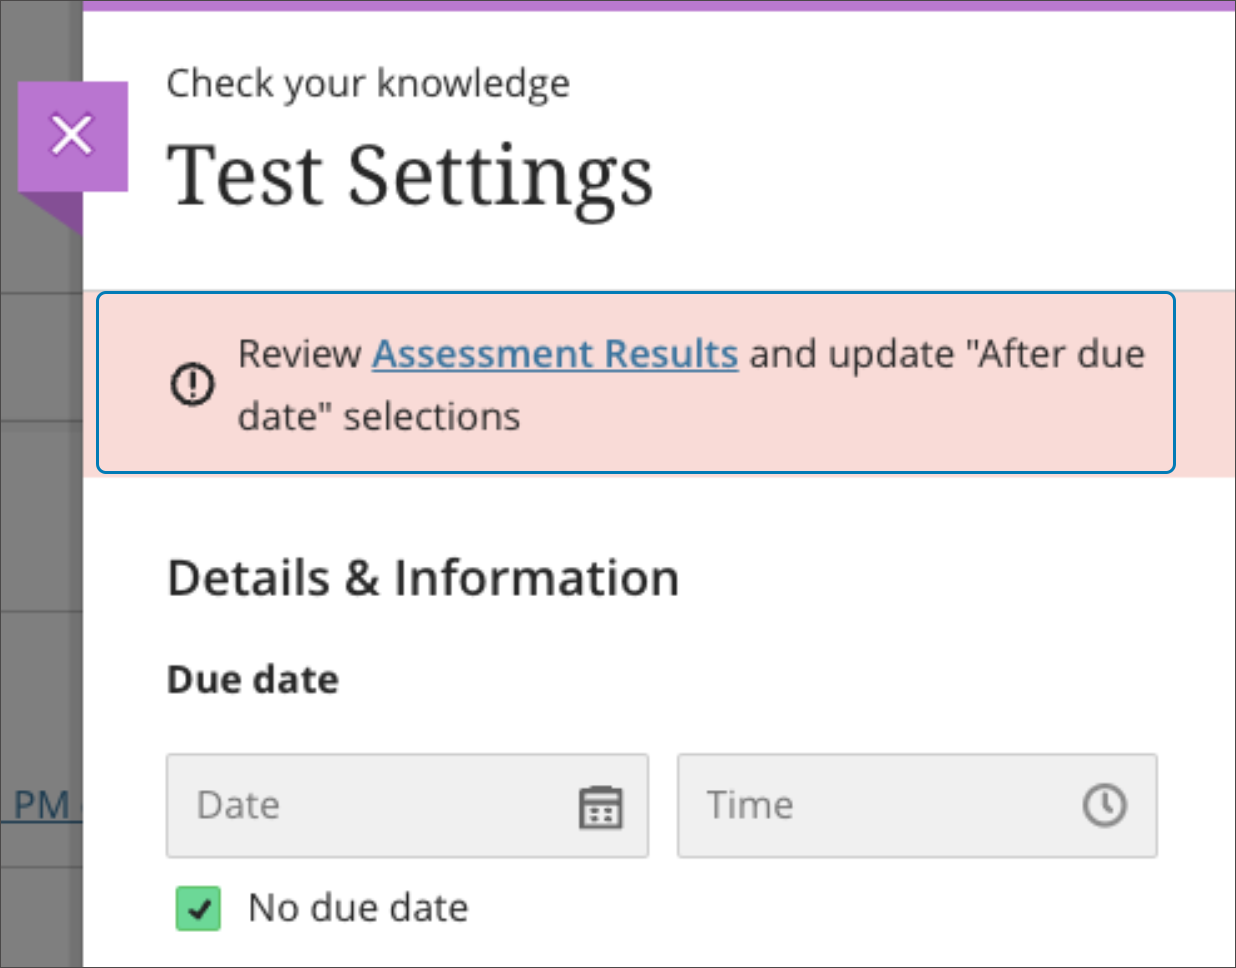 A warning banner appears when the "No due date" selection conflicts with Assessment Results settings